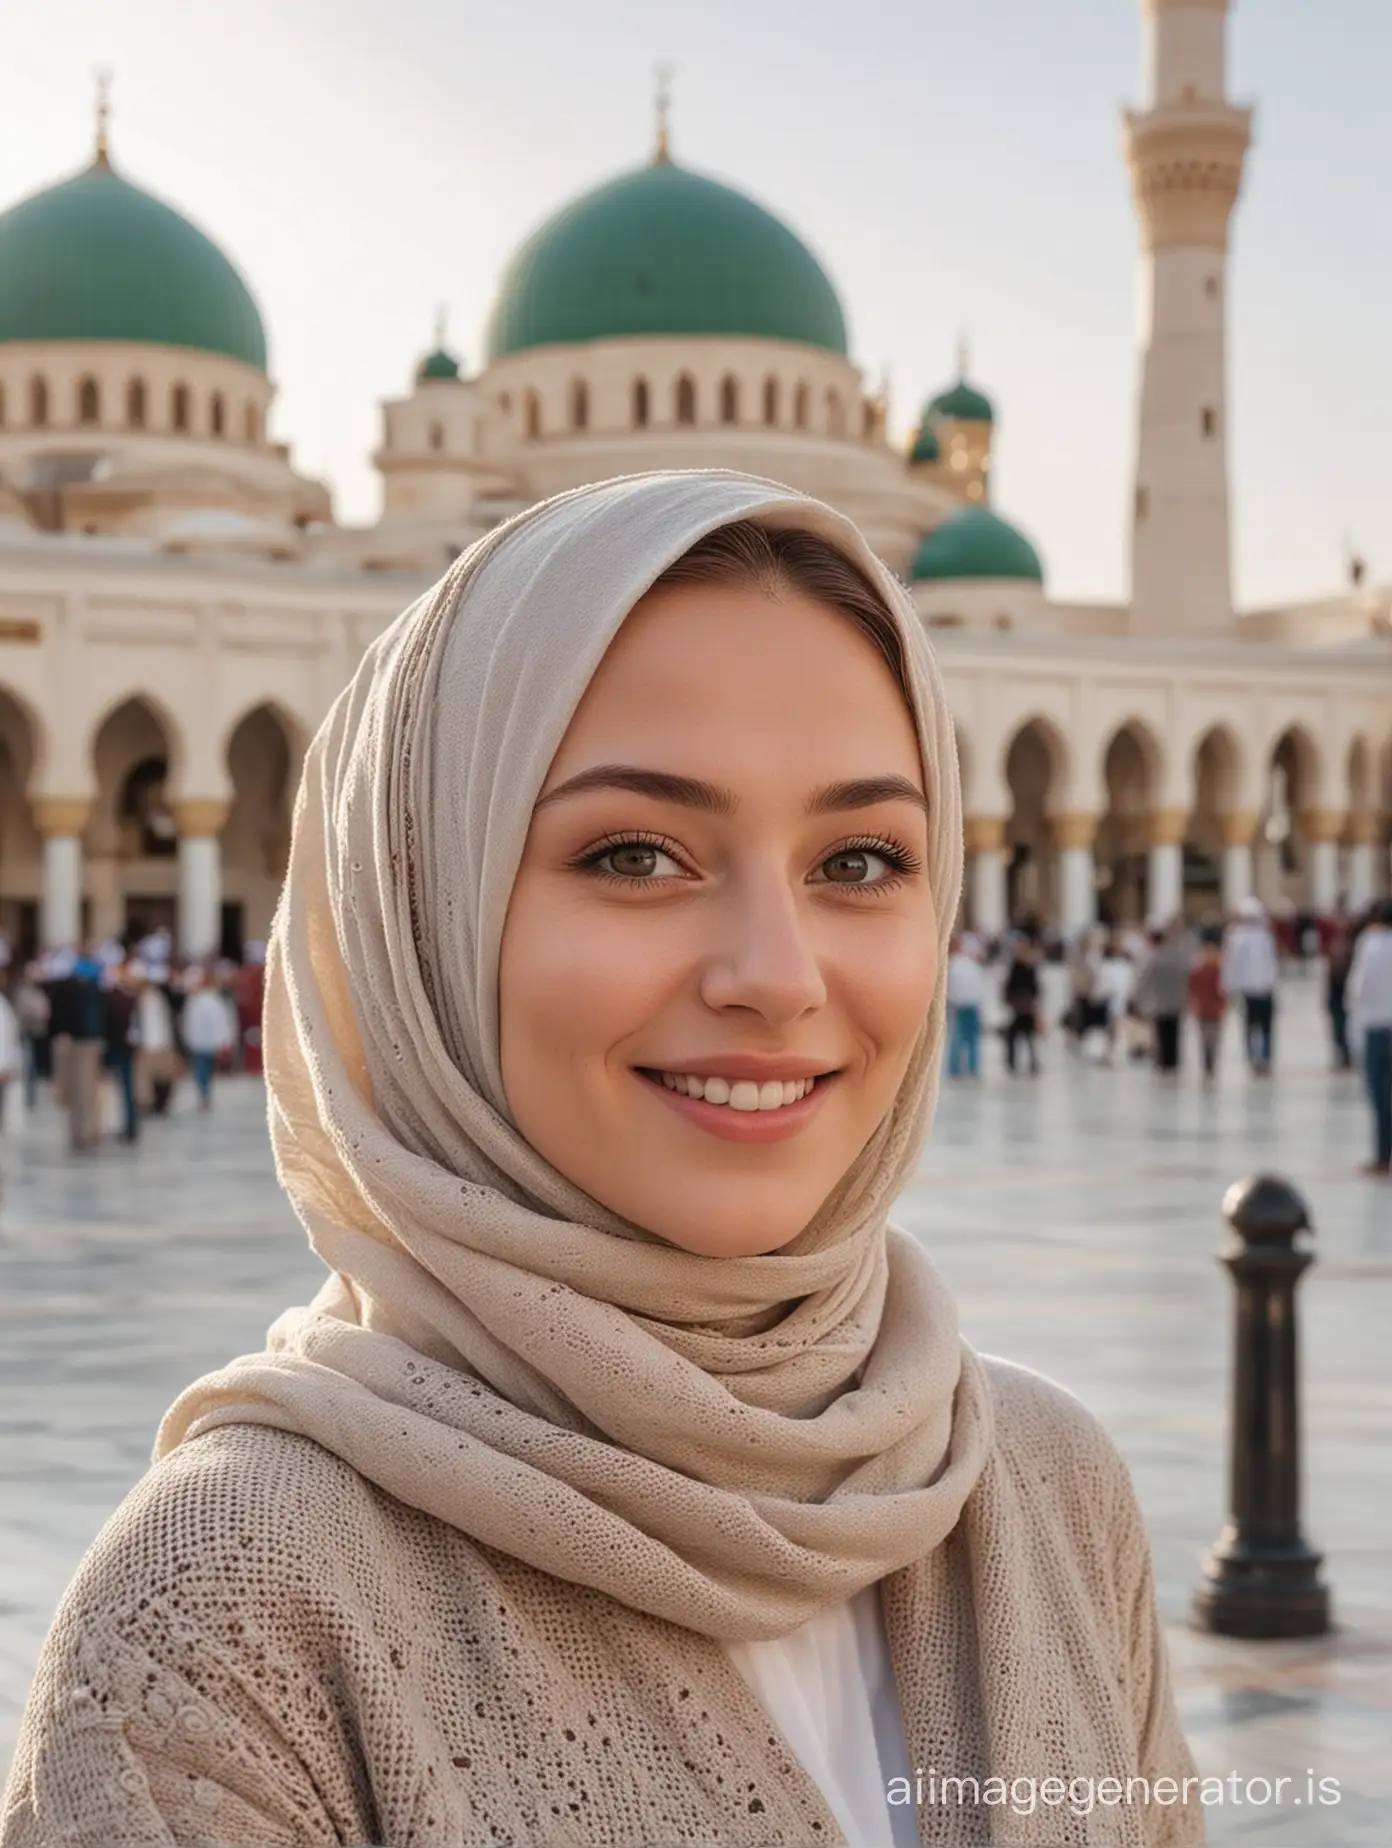 Dynamic-Pose-of-Smiling-Russian-Girl-in-Hijab-with-Mecca-Mosque-Background